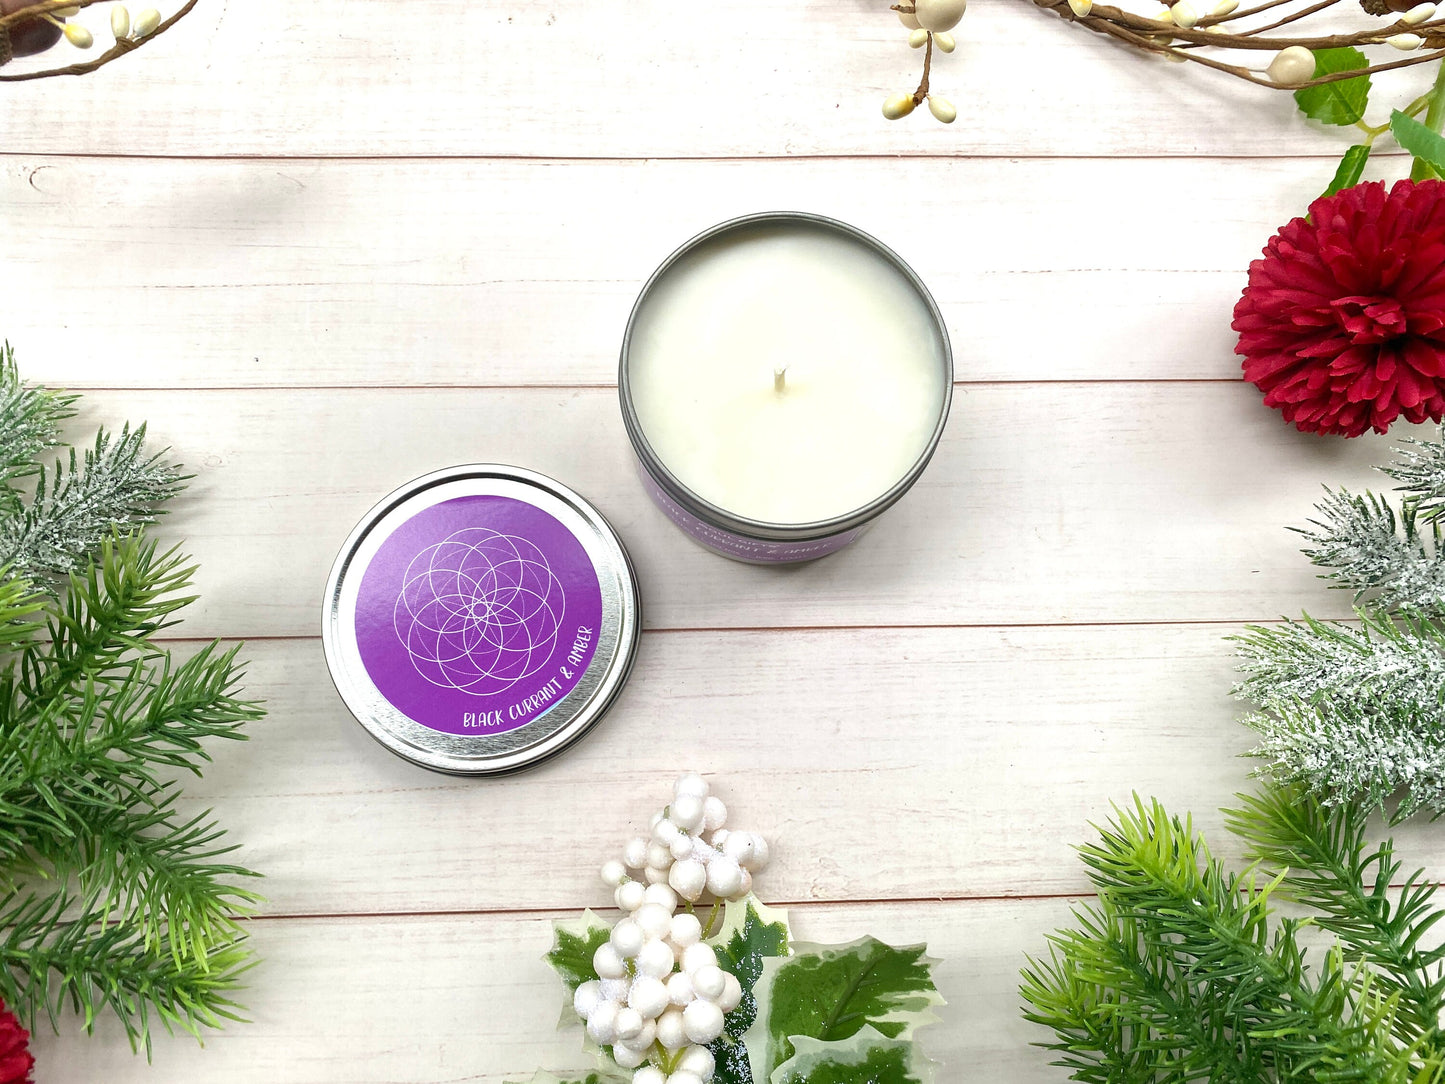 Black Currant Amber Candle - Soul Gifts Soy Candle - 8oz Tin Candle